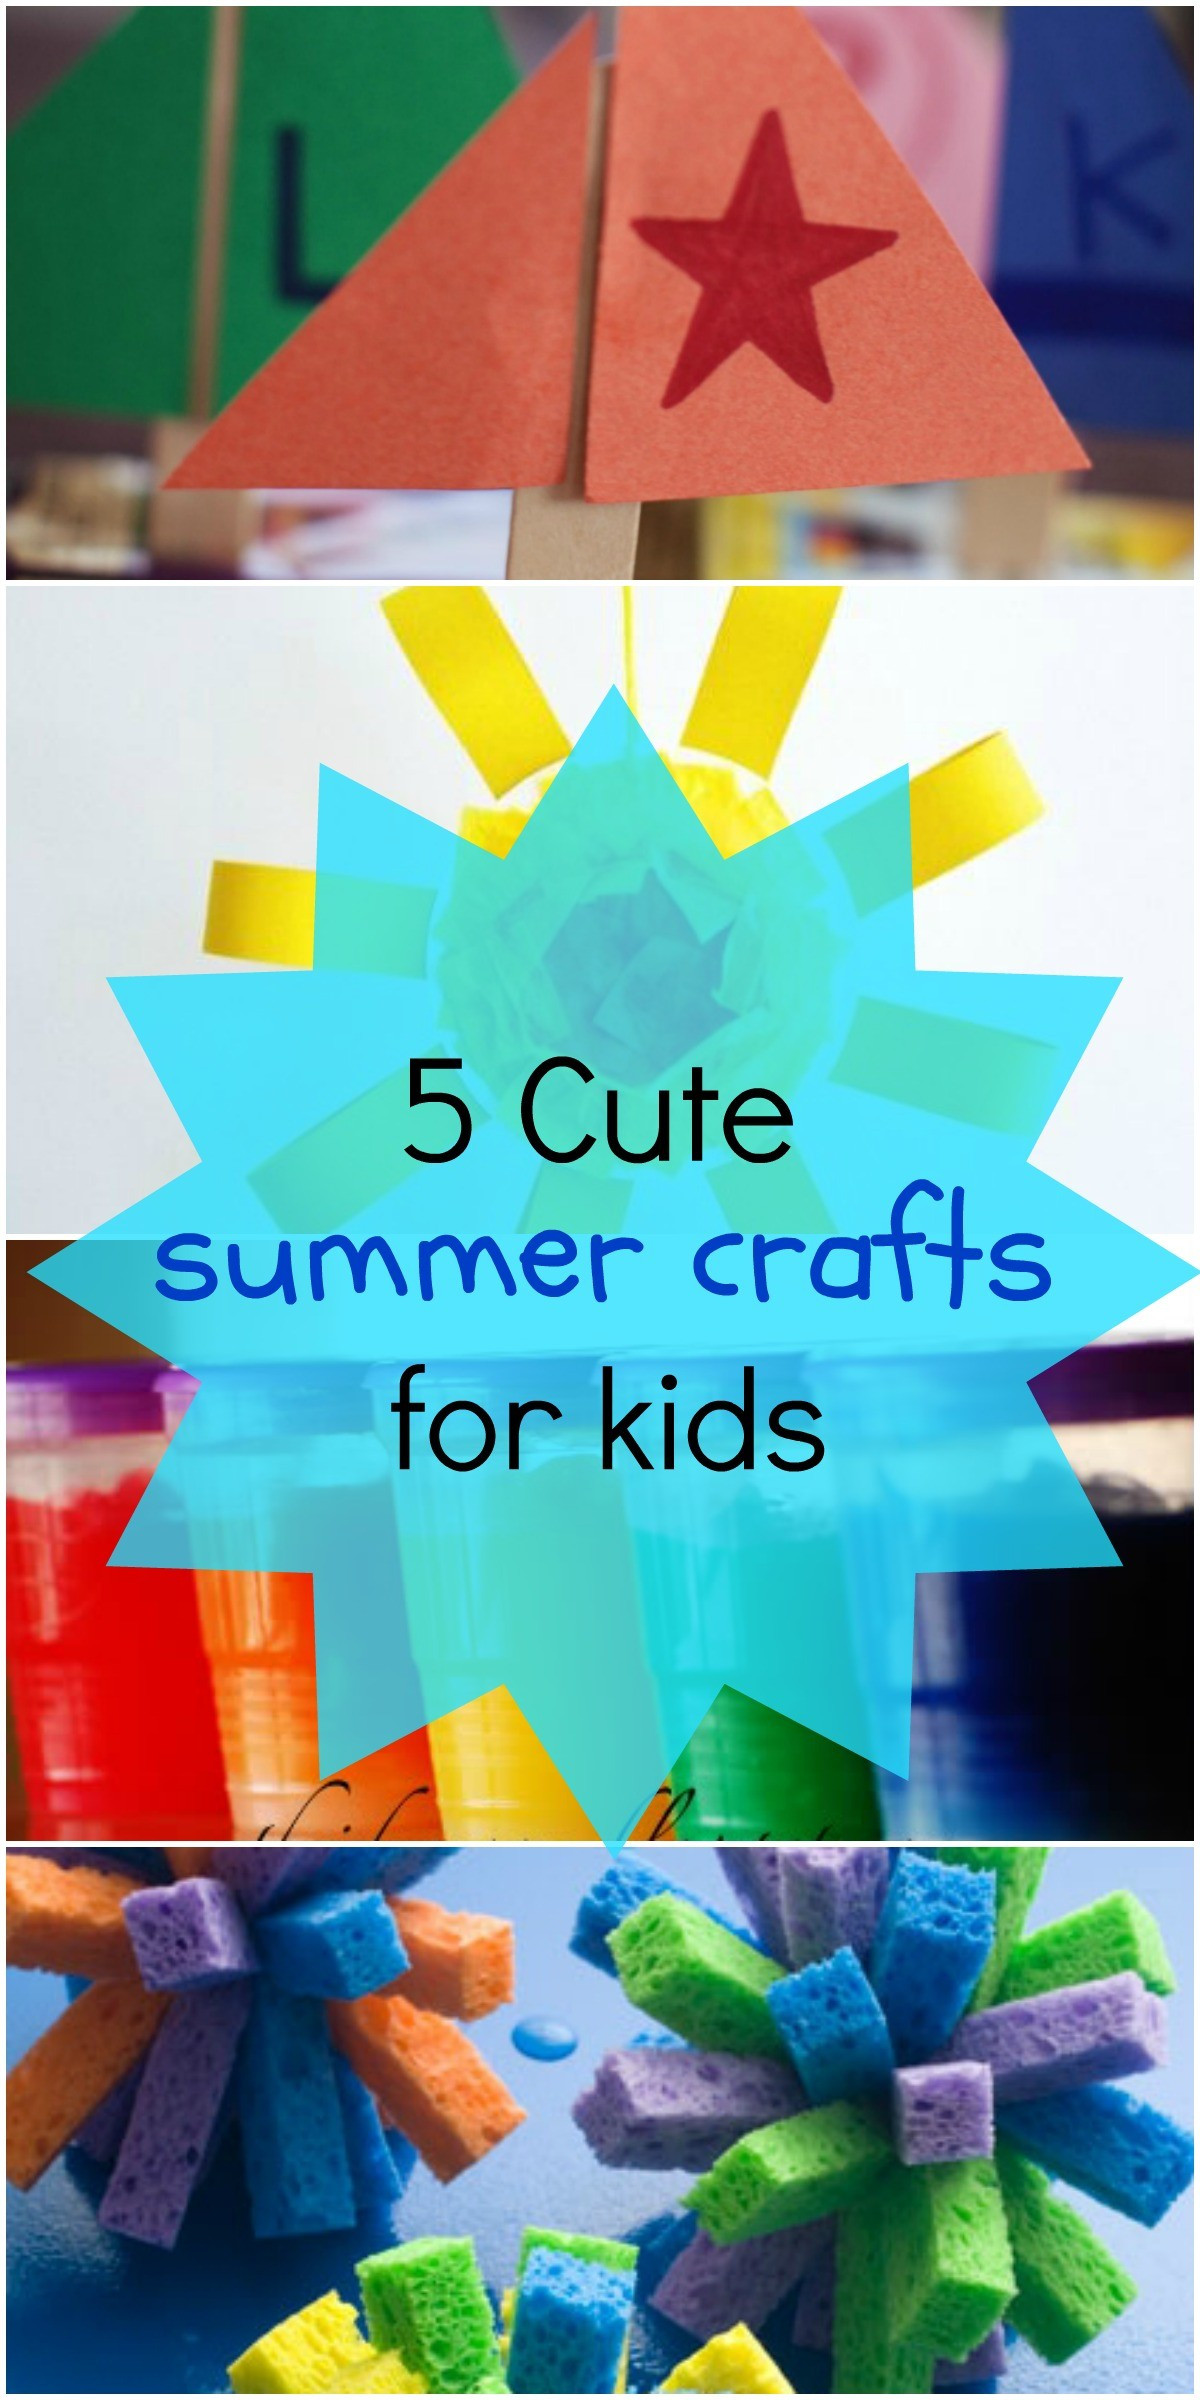 Summer Art And Crafts For Preschoolers
 5 Fun Summer Crafts for Kids Love These Art Project Ideas